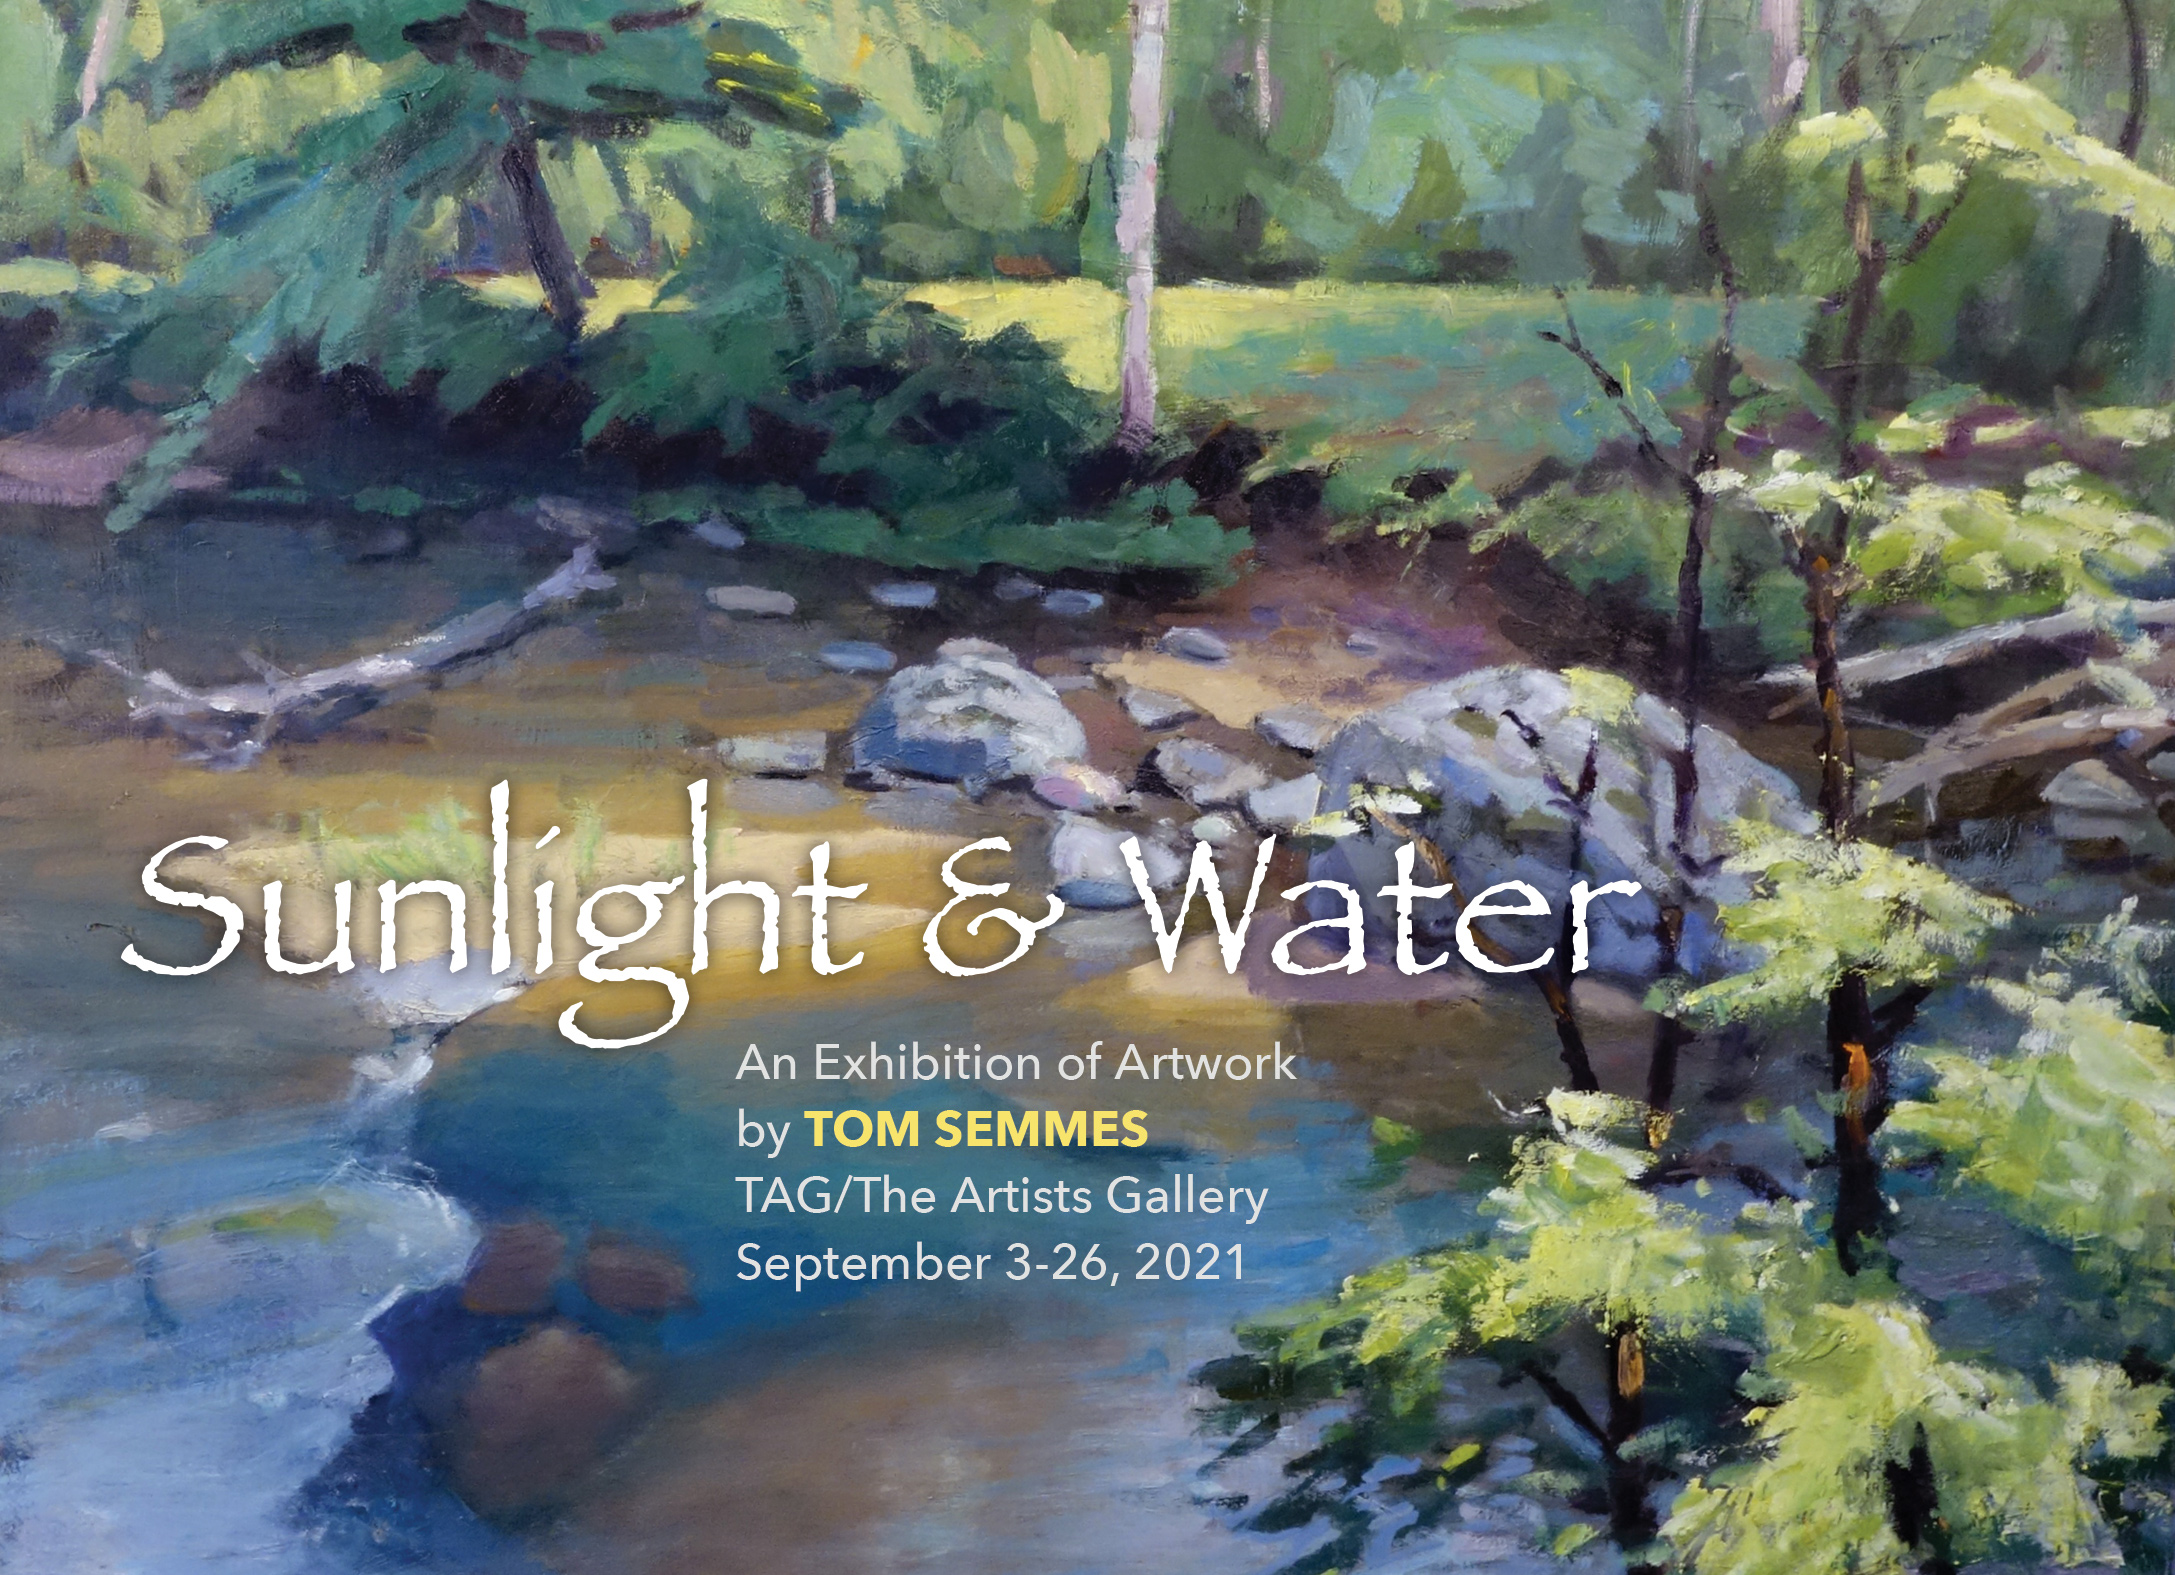 An invitation to Sunlight & Water, an exhibition of artwork by Tom Semmes